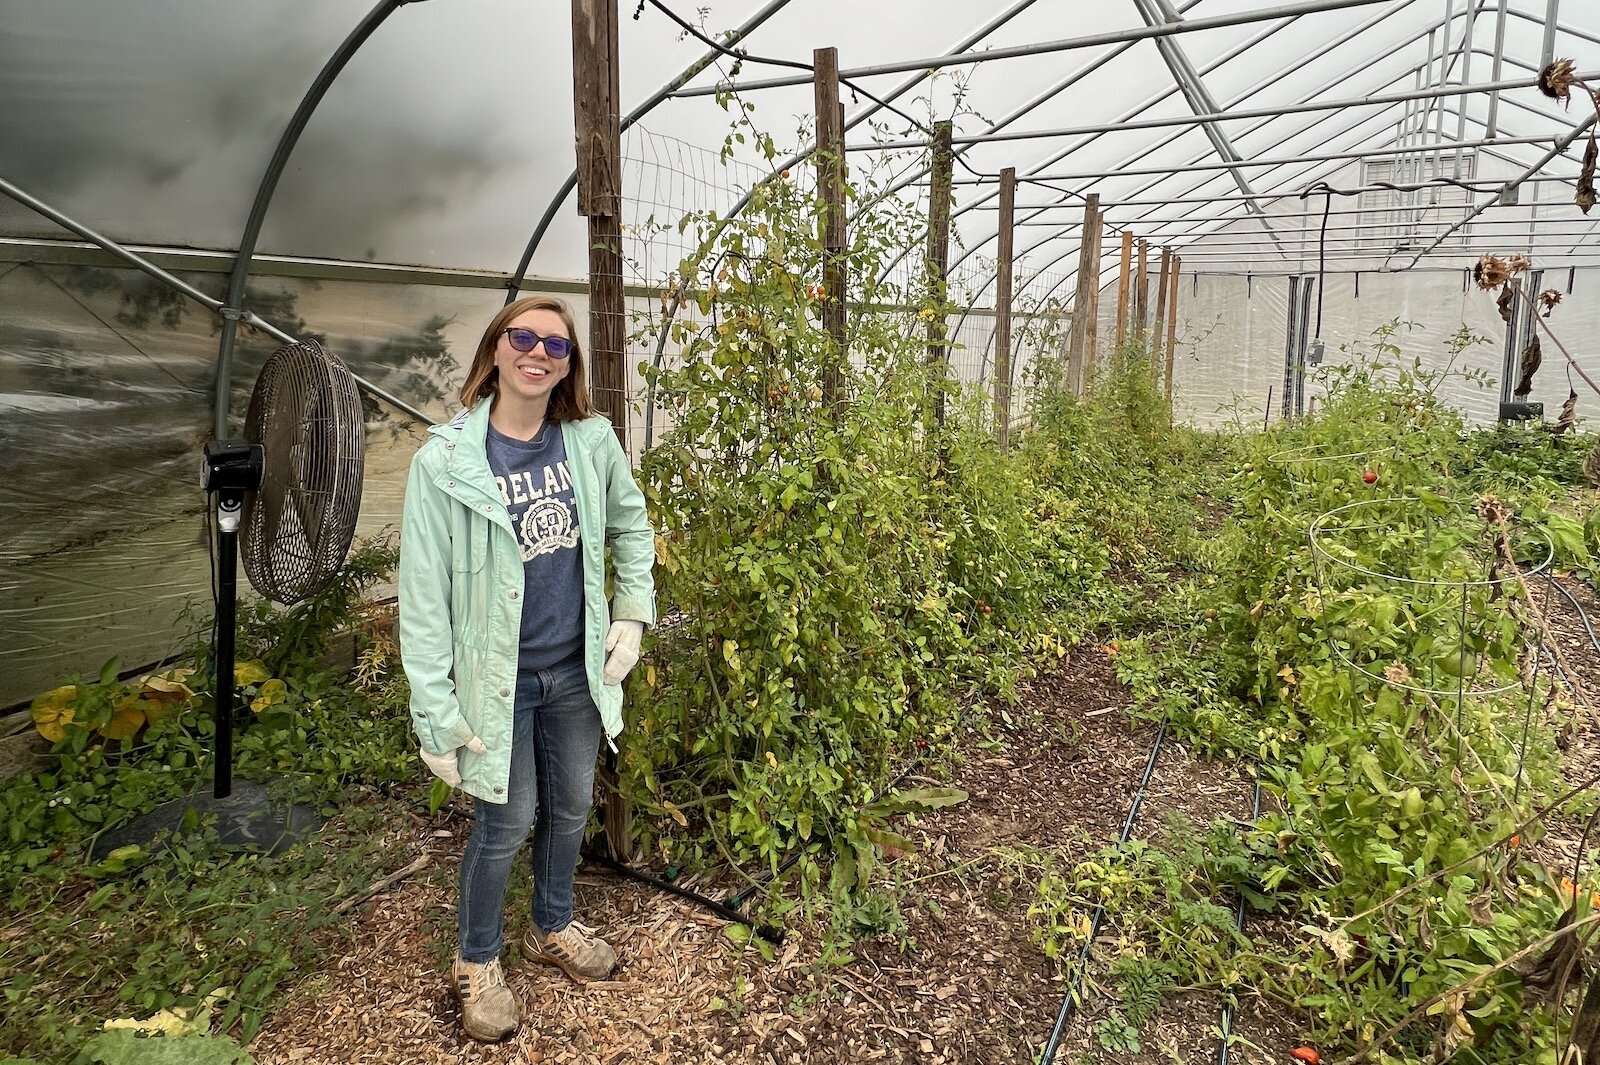 Krystal York helped start WMU’s composting program, which still composts all of the food waste from Western’s two largest dining halls. York and her classmates made the composting machine solar-powered to ensure the process was less labor-intensive.